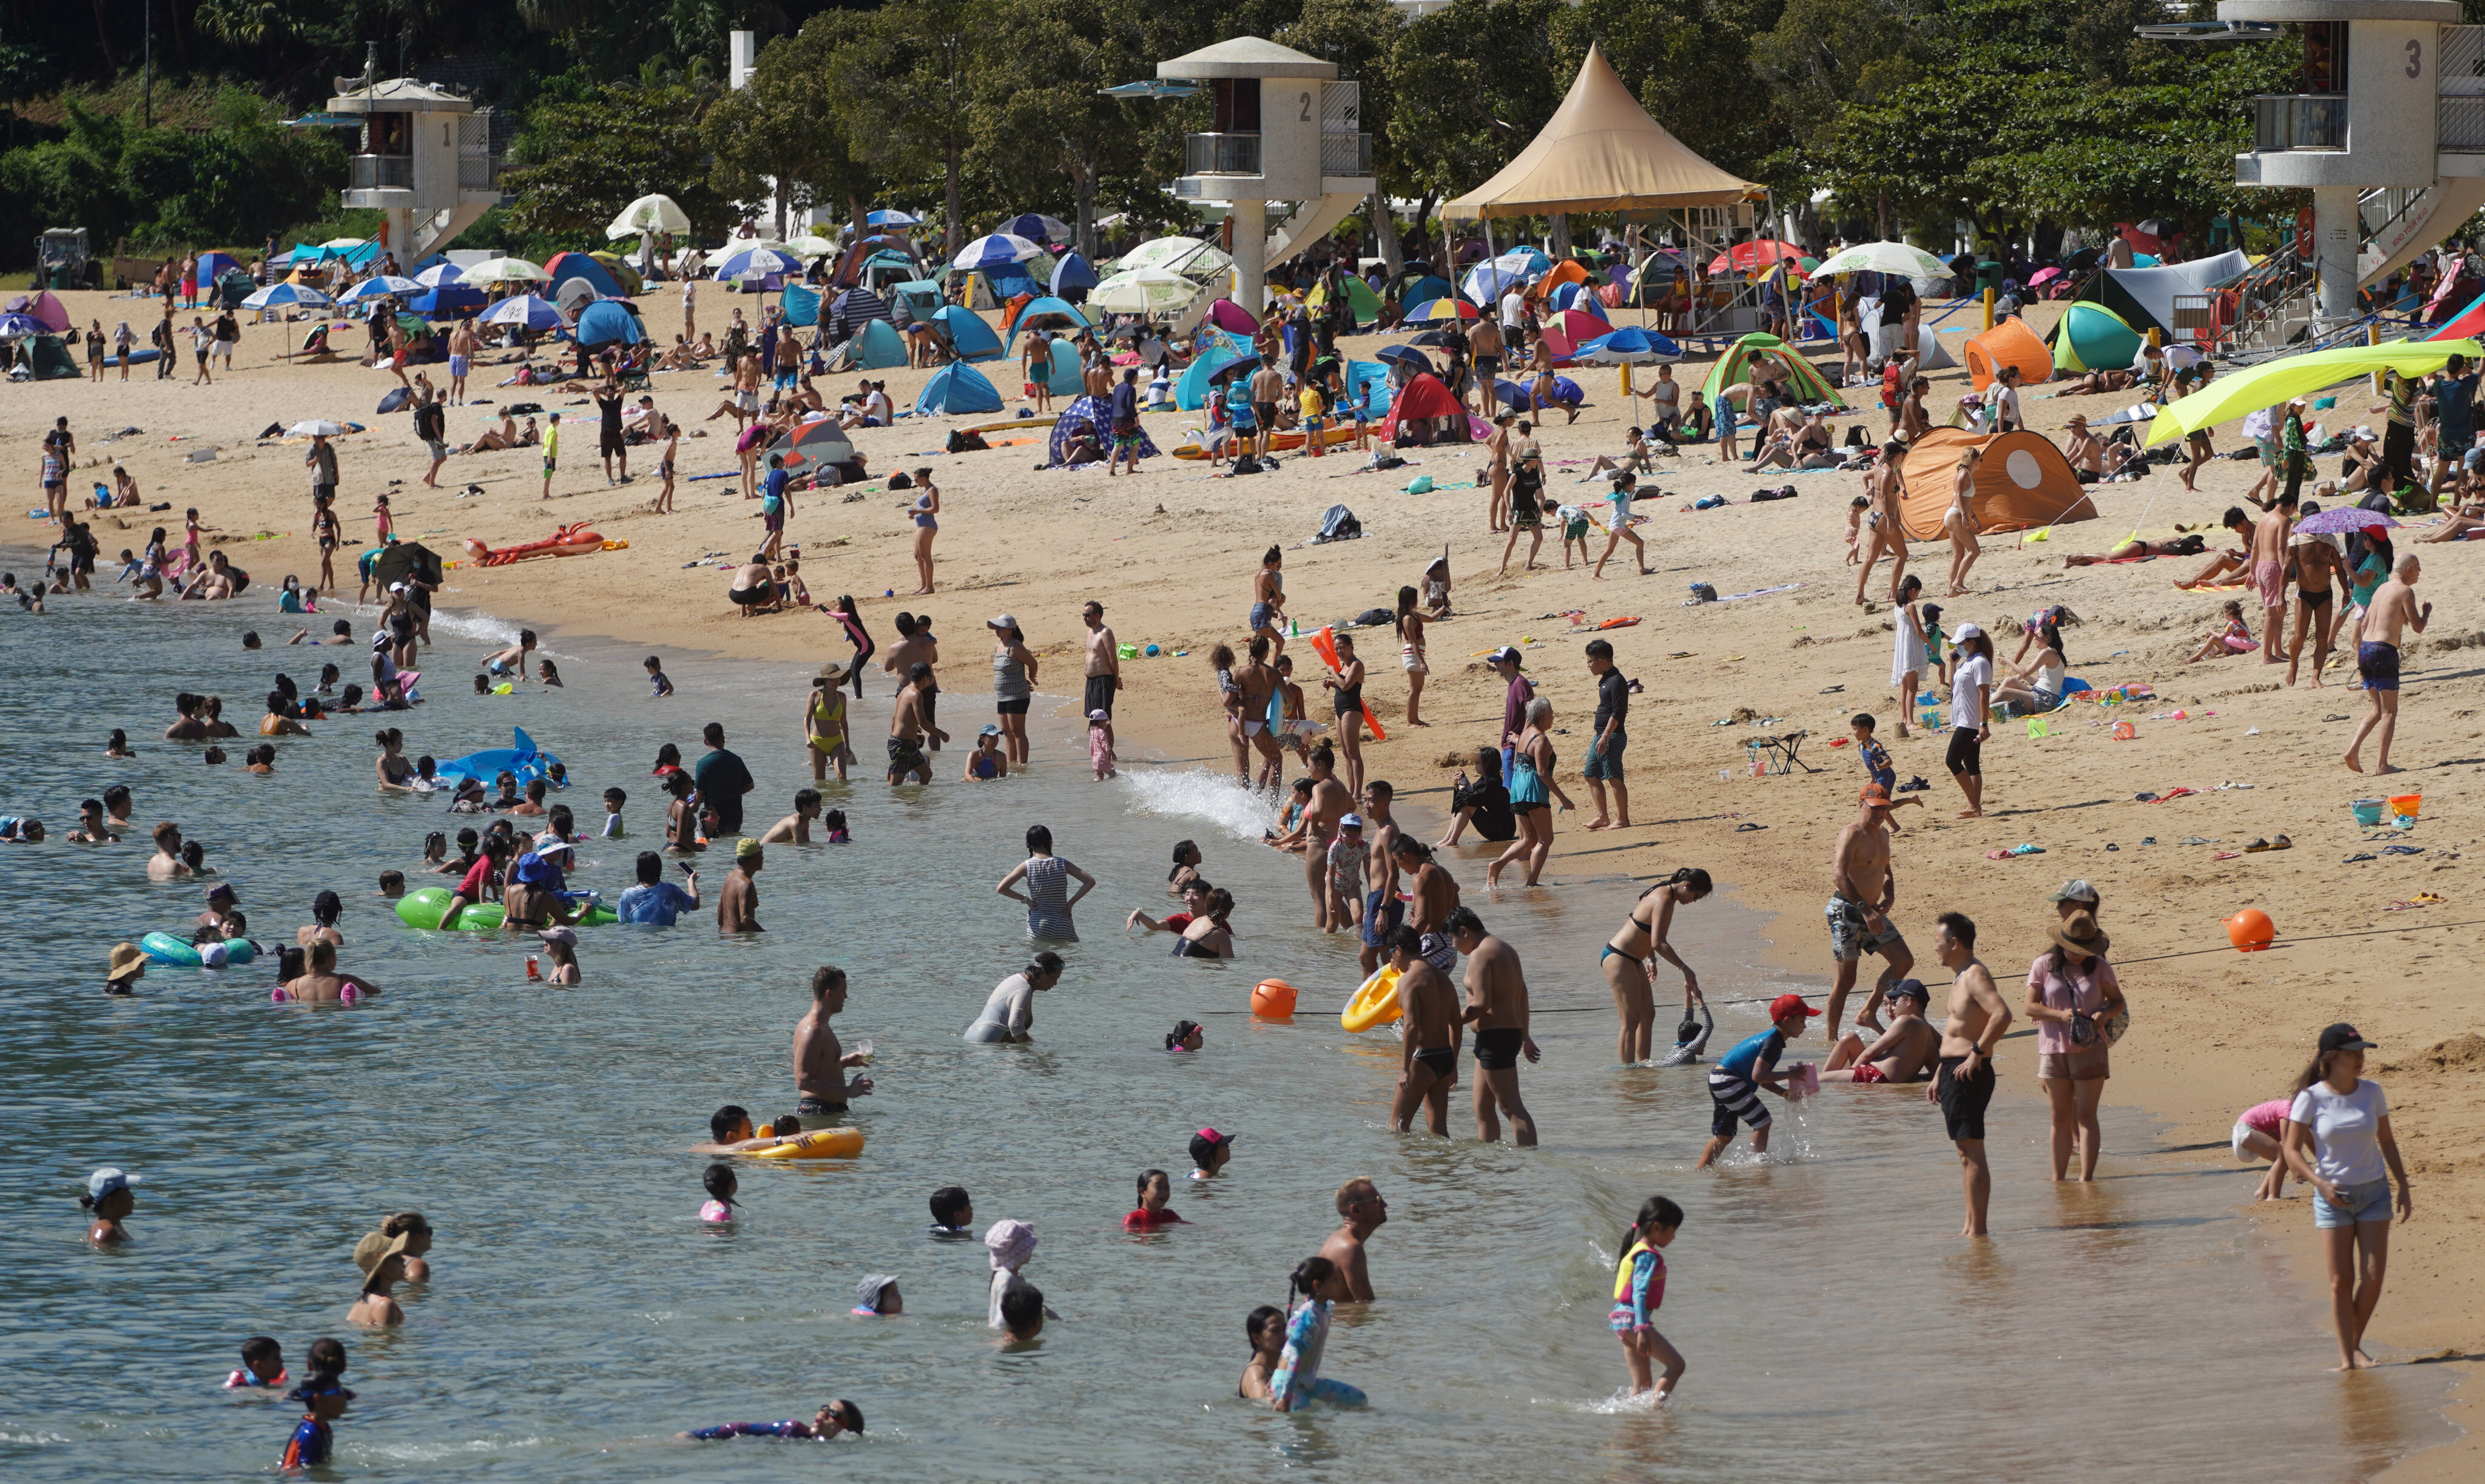 Hong Kong’s crowded public beaches amid the fifth wave of the coronavirus have drawn scorn across the border, where residents are under strict lockdowns. Photo: Winson Wong